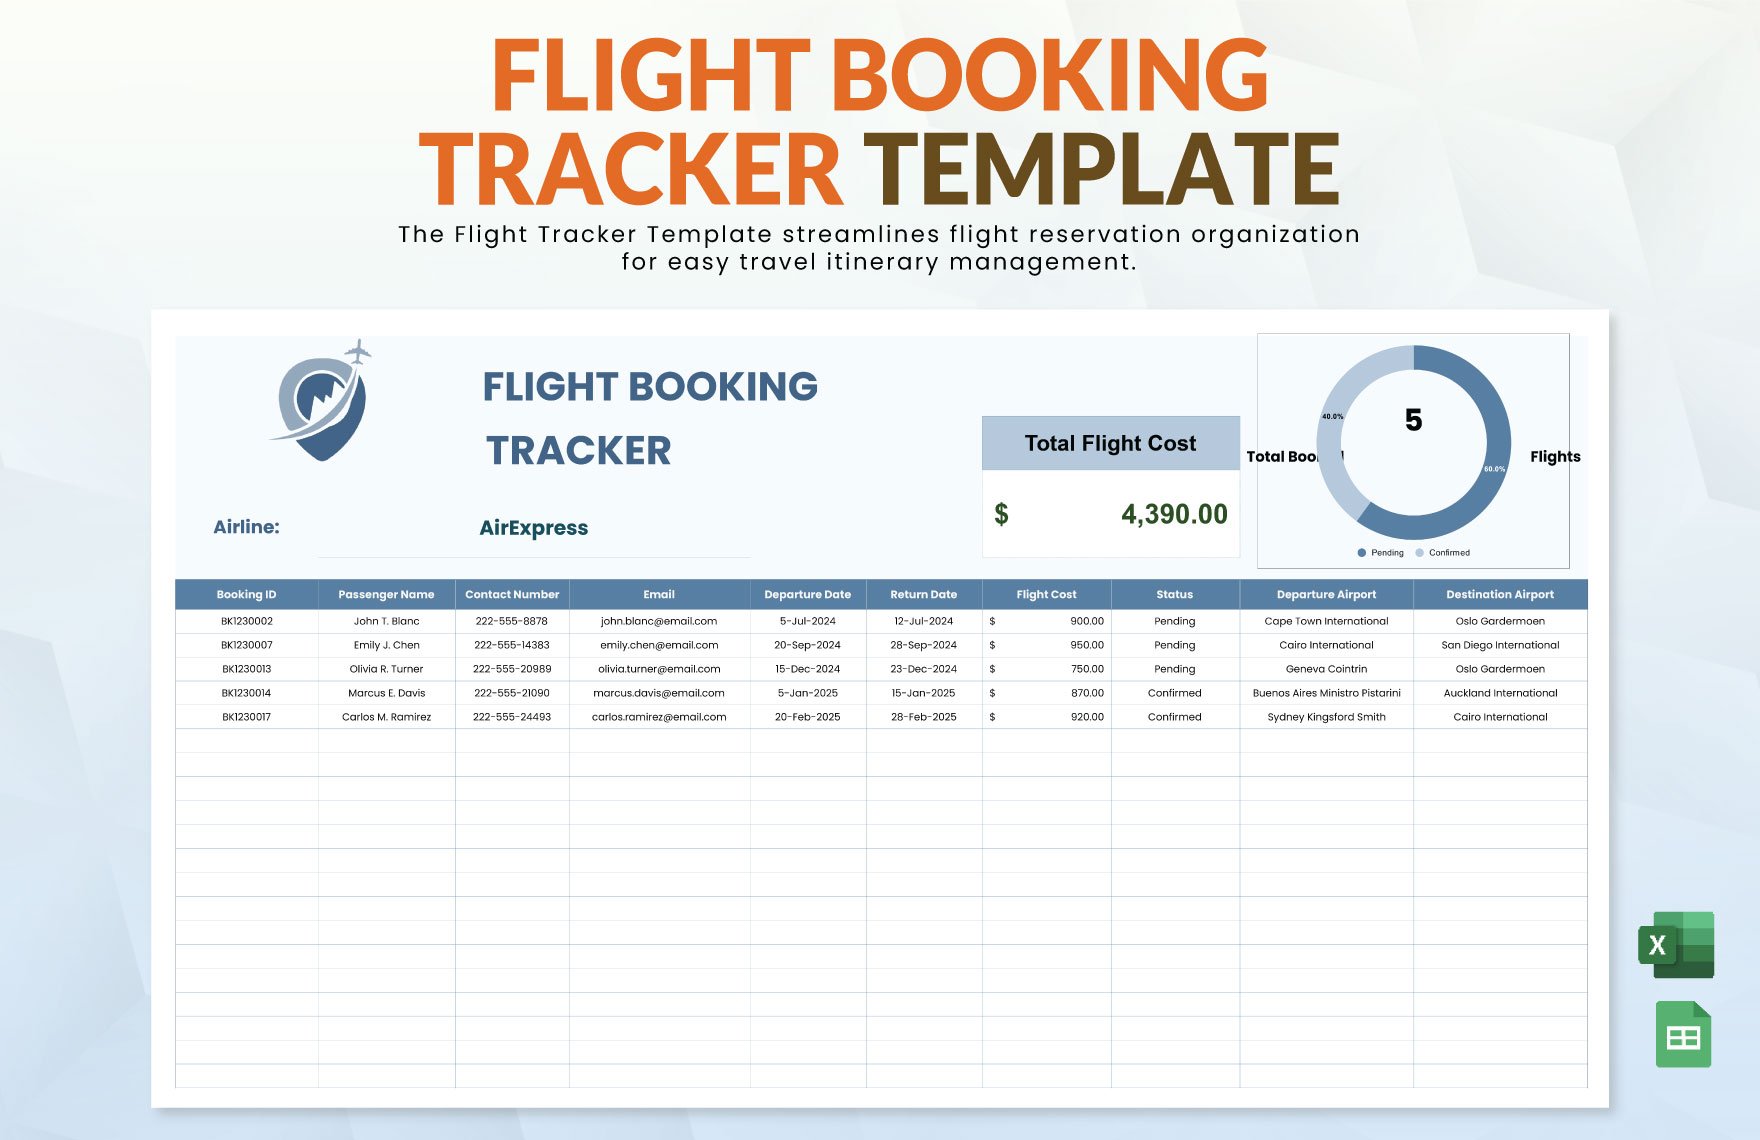 Flight Booking Tracker Template in Excel, Google Sheets